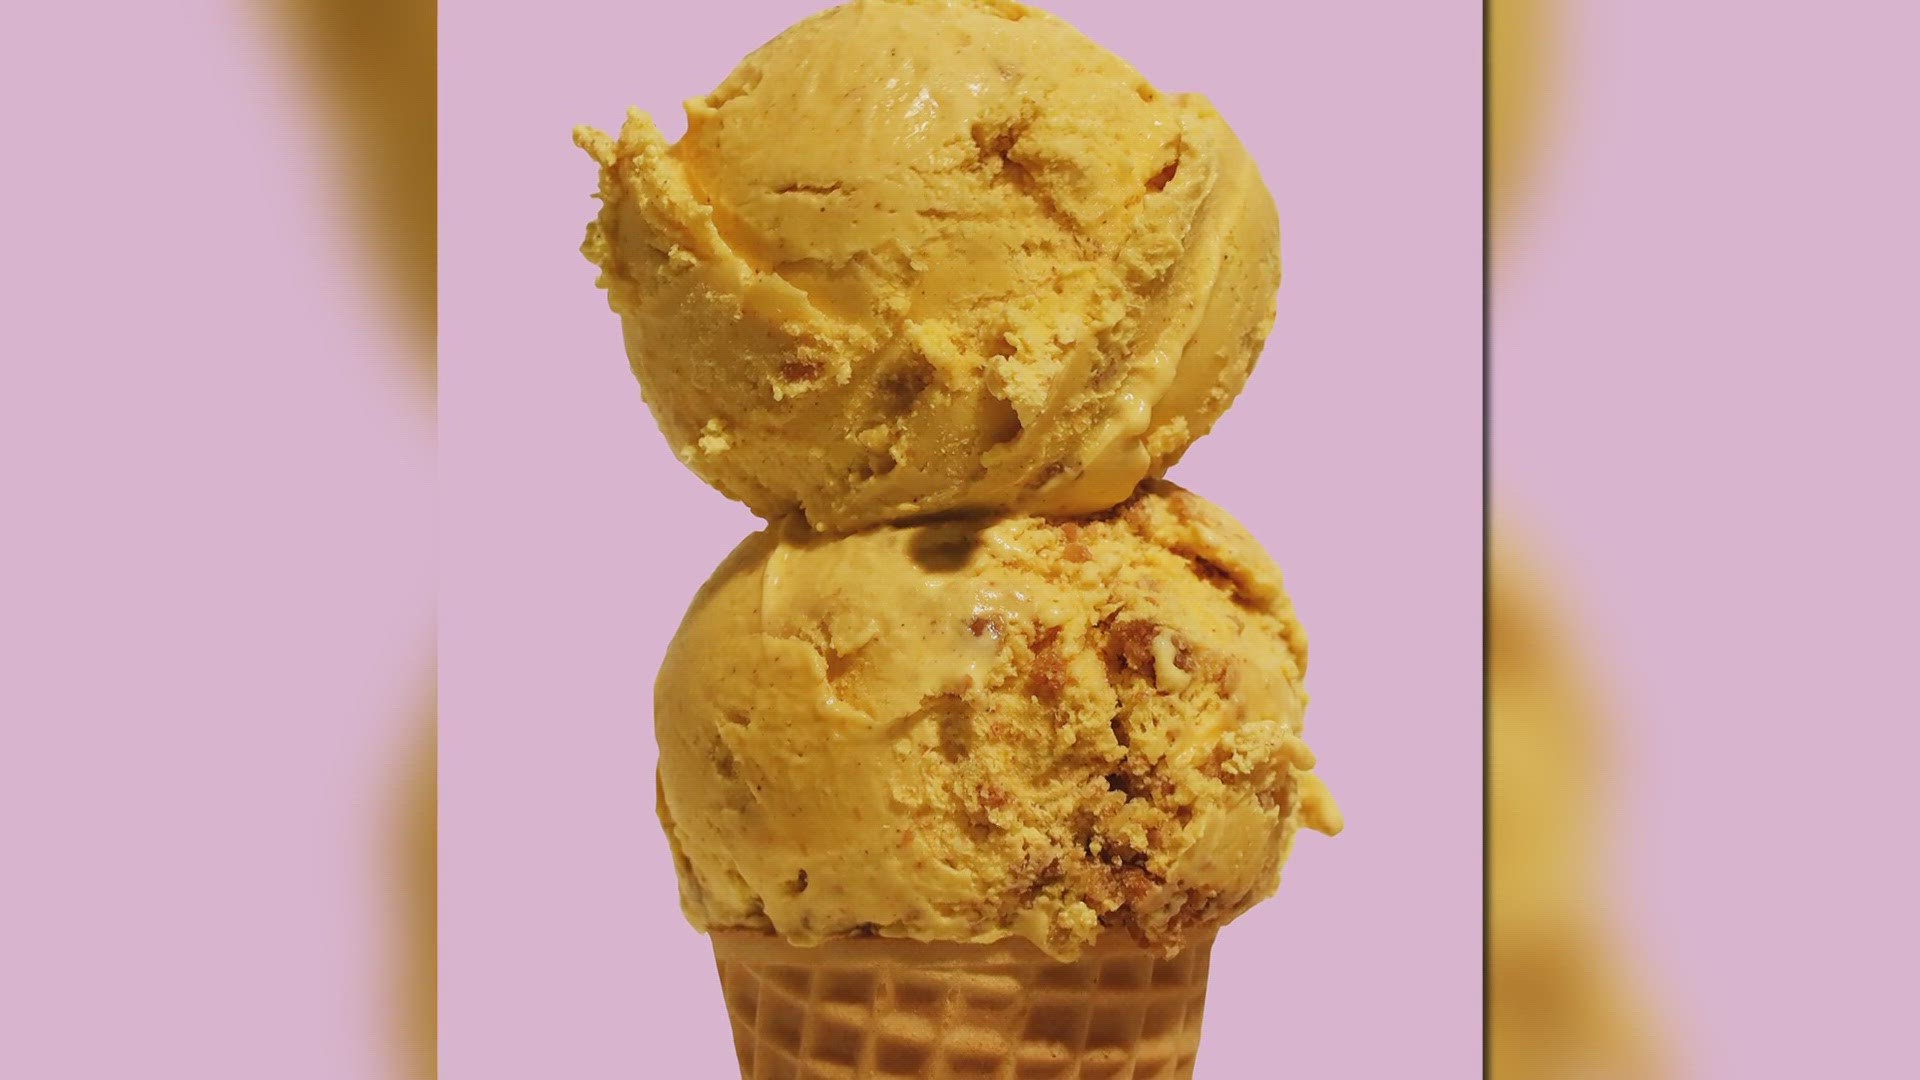 Pumpkin cheesecake and cranberry crumble are among the flavors getting some love at Van Leeuwen Ice Cream this season.